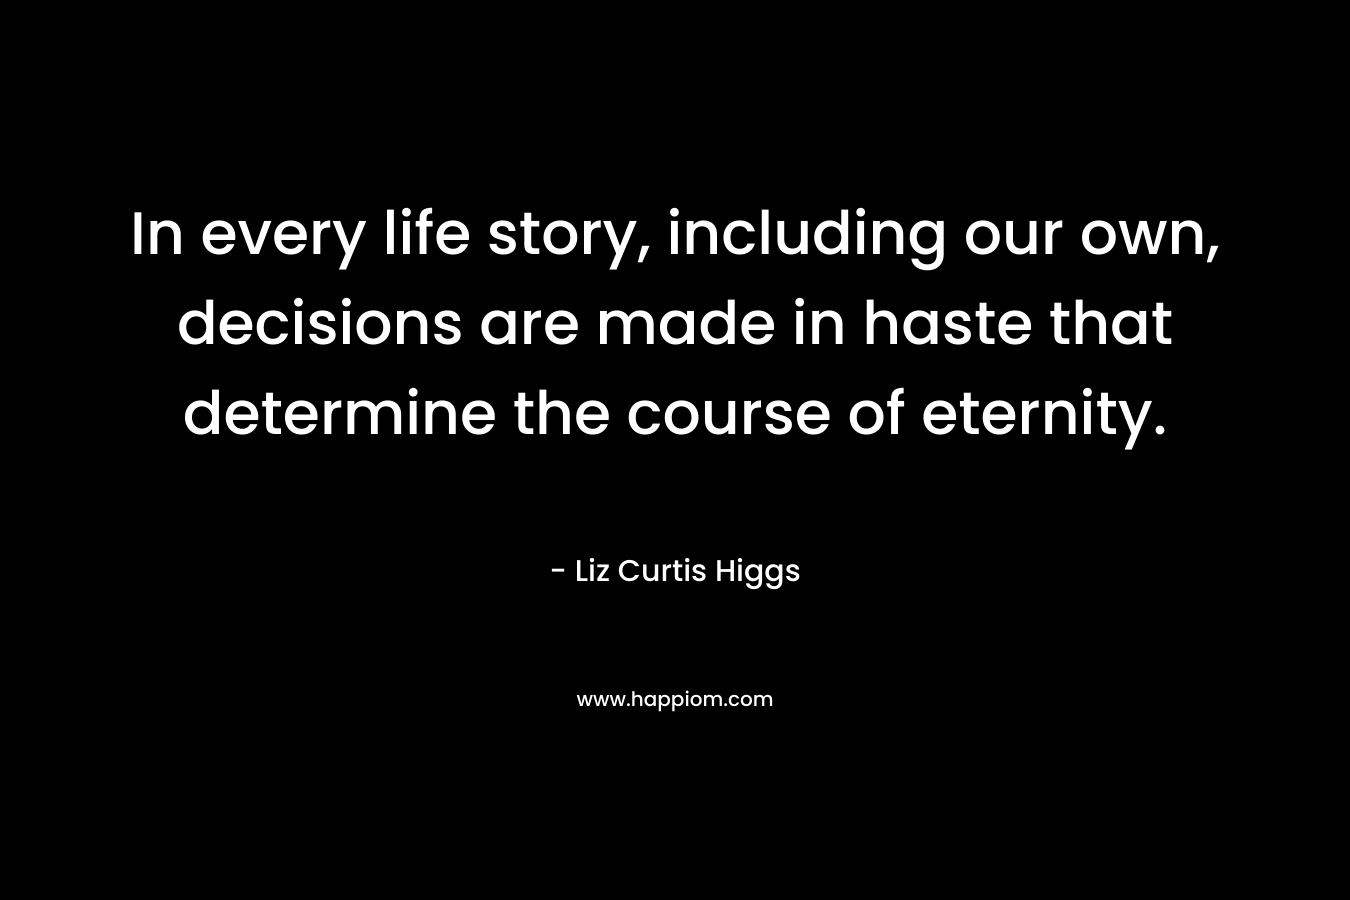 In every life story, including our own, decisions are made in haste that determine the course of eternity. – Liz Curtis Higgs